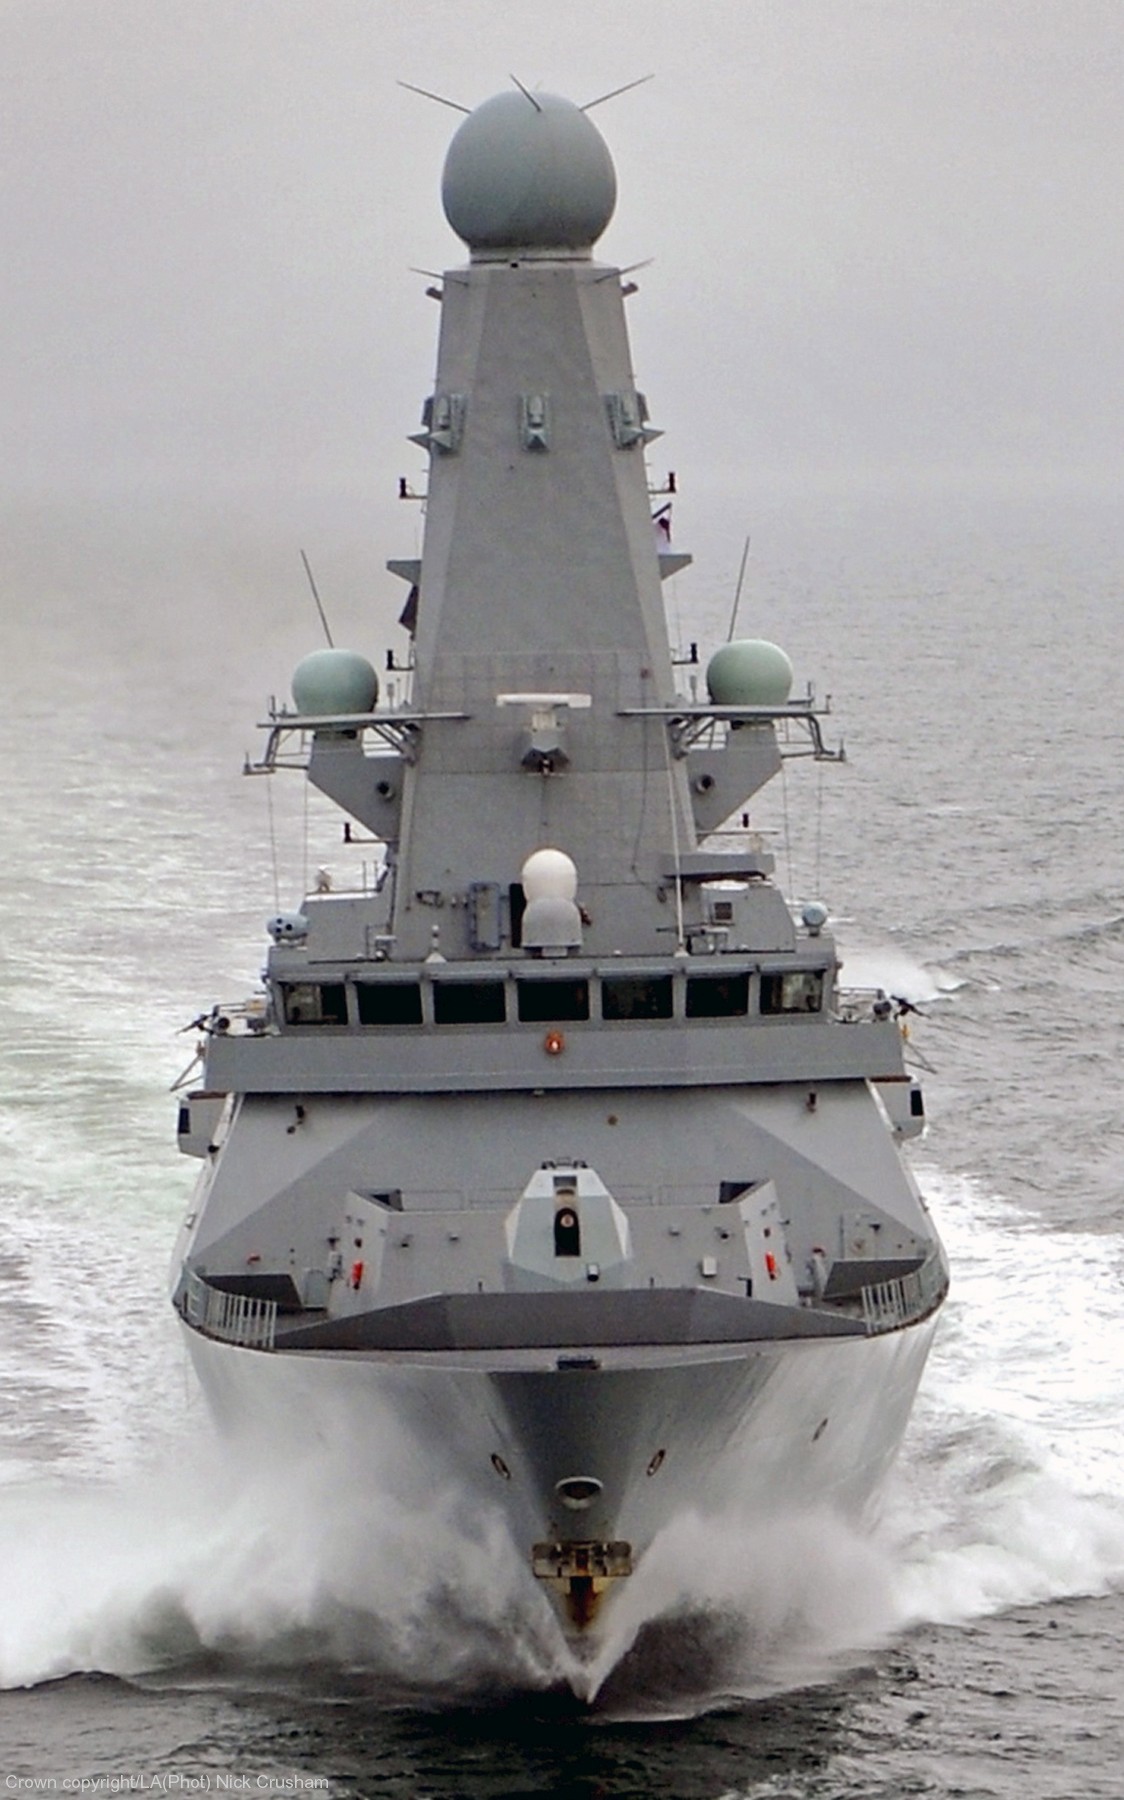 hms diamond d-34 type 45 daring class guided missile destroyer ddg royal navy sea viper paams 21